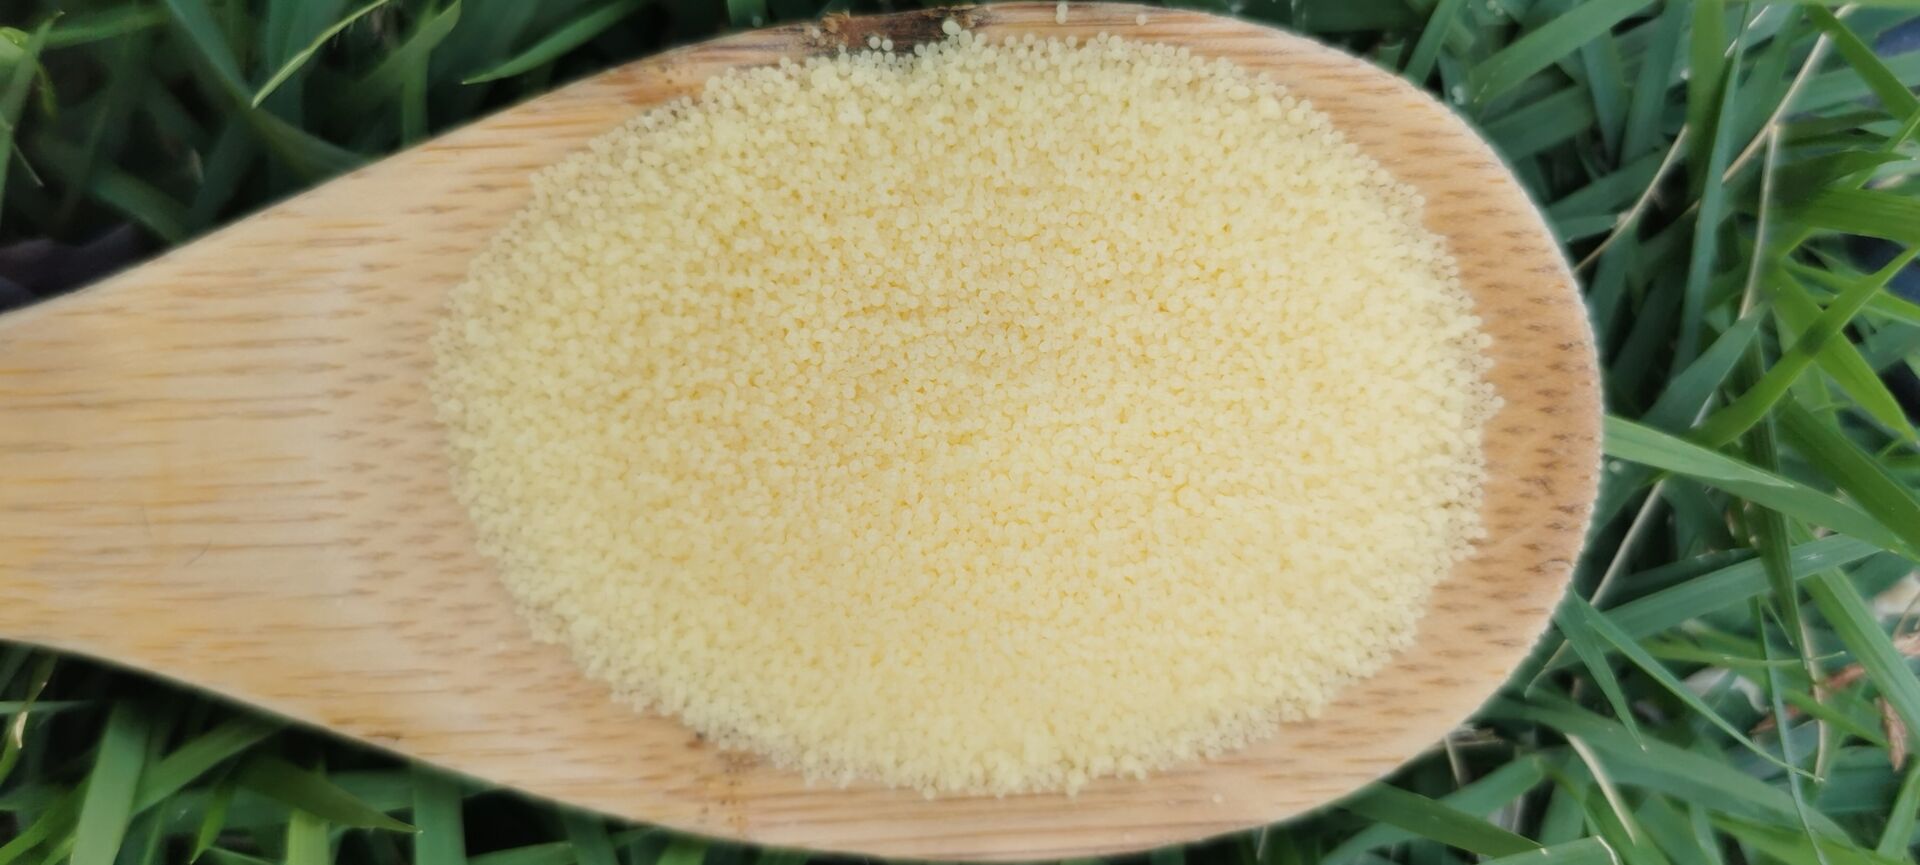 Candelilla Wax for Soap Making & Cosmetics